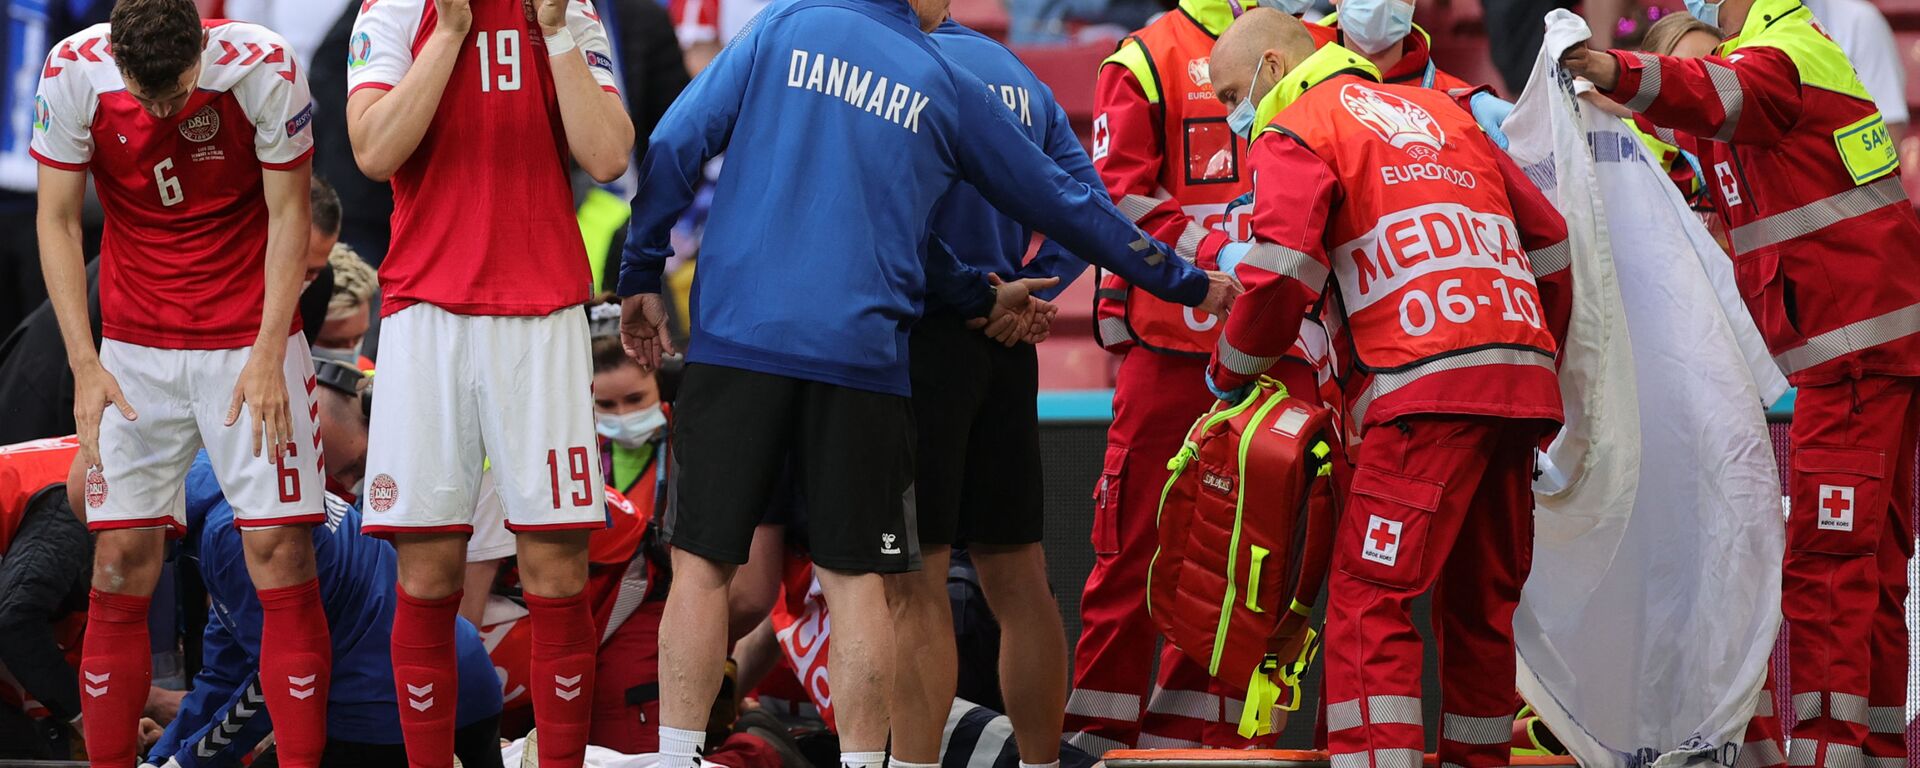 Denmark's players react as paramedics attend to Denmark's midfielder Christian Eriksen after he collapsed on the pitch during the UEFA EURO 2020 Group B football match between Denmark and Finland at the Parken Stadium in Copenhagen on June 12, 2021. - اسپوتنیک افغانستان  , 1920, 14.06.2021